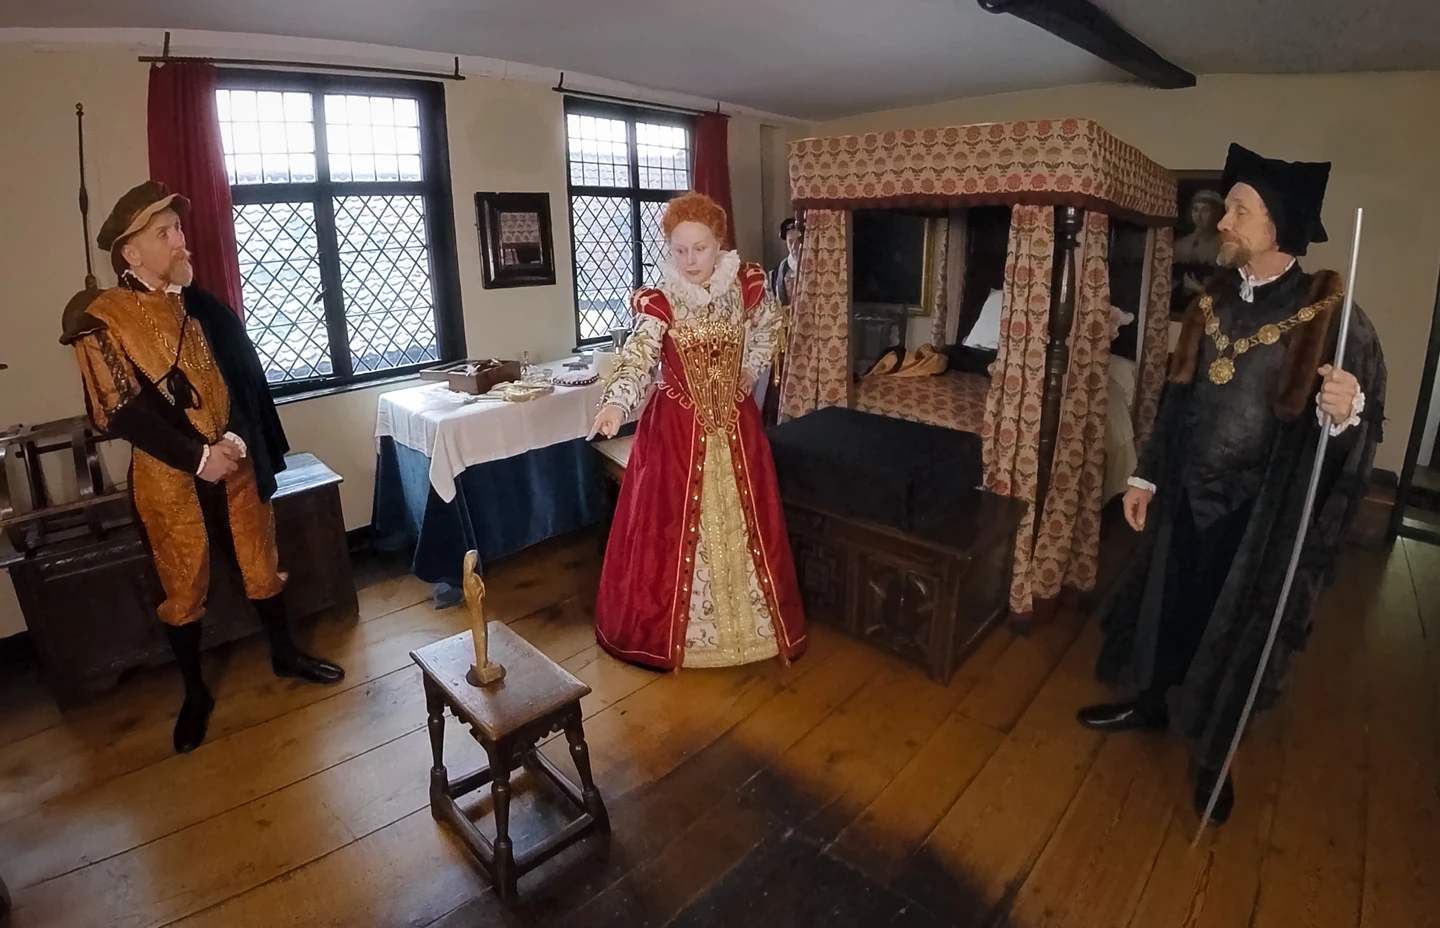 Elizabeth the First flanked by servants in a bedroom